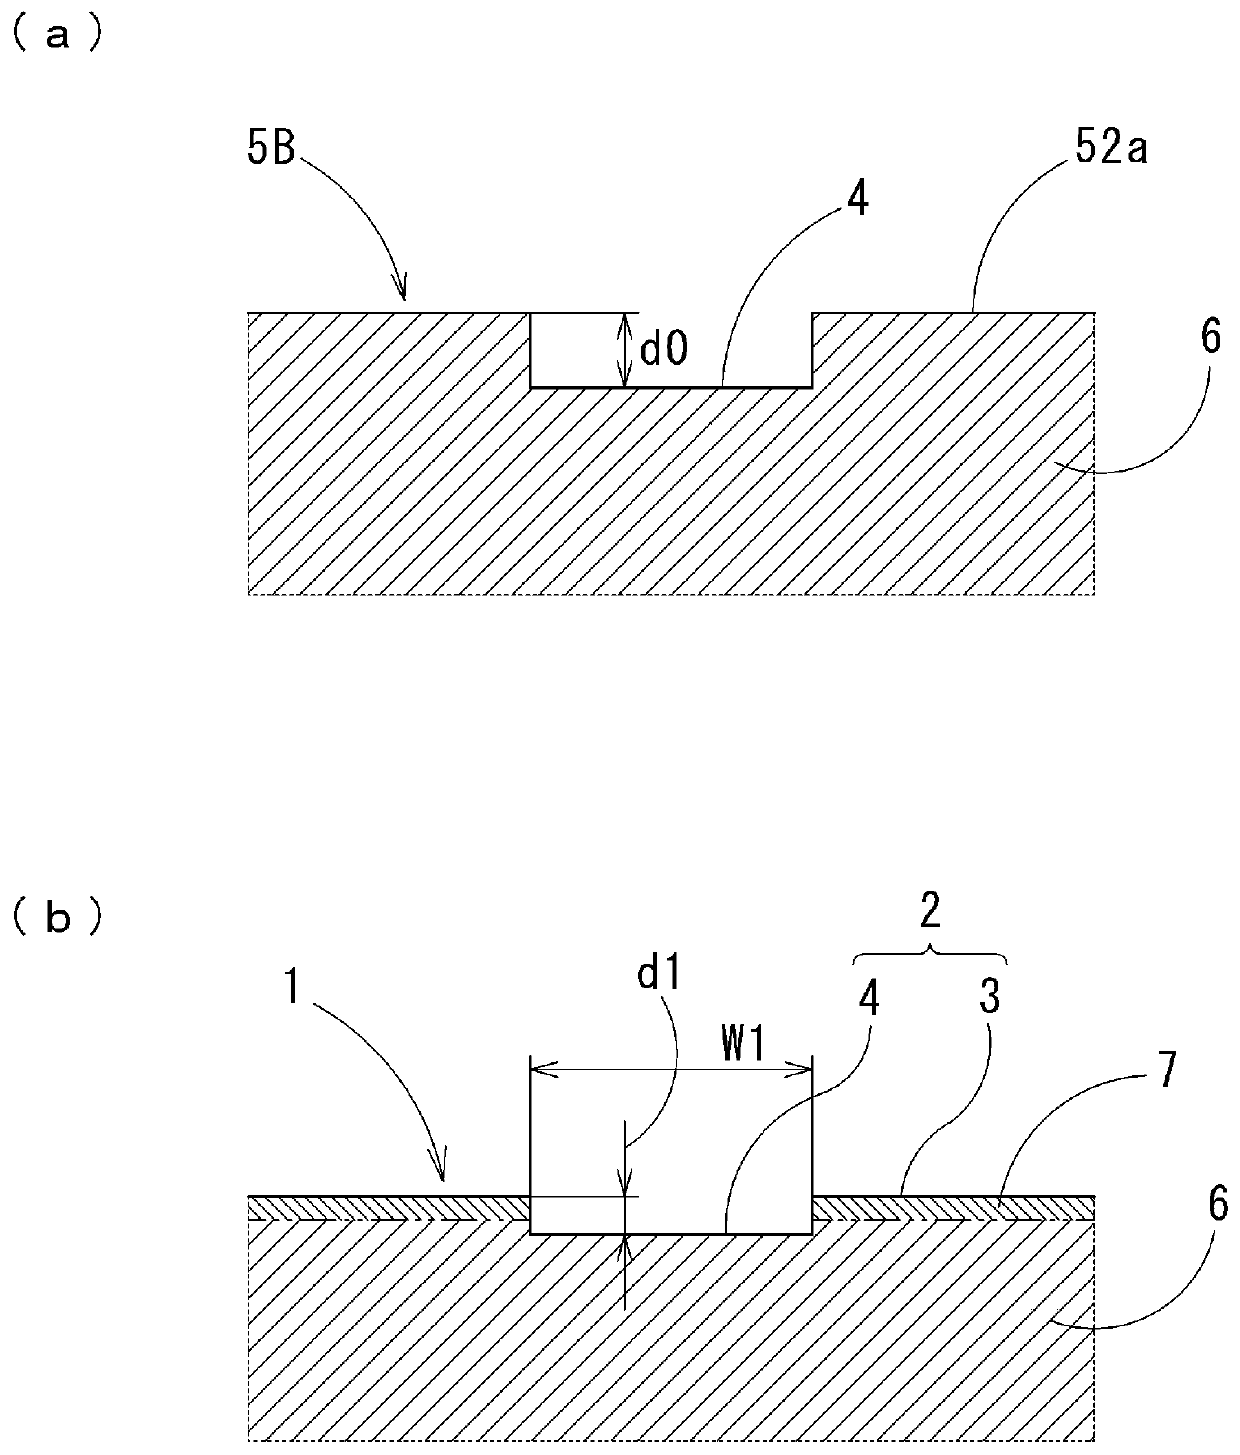 Oil-impregnated sintered bearing and method for manufacturing same